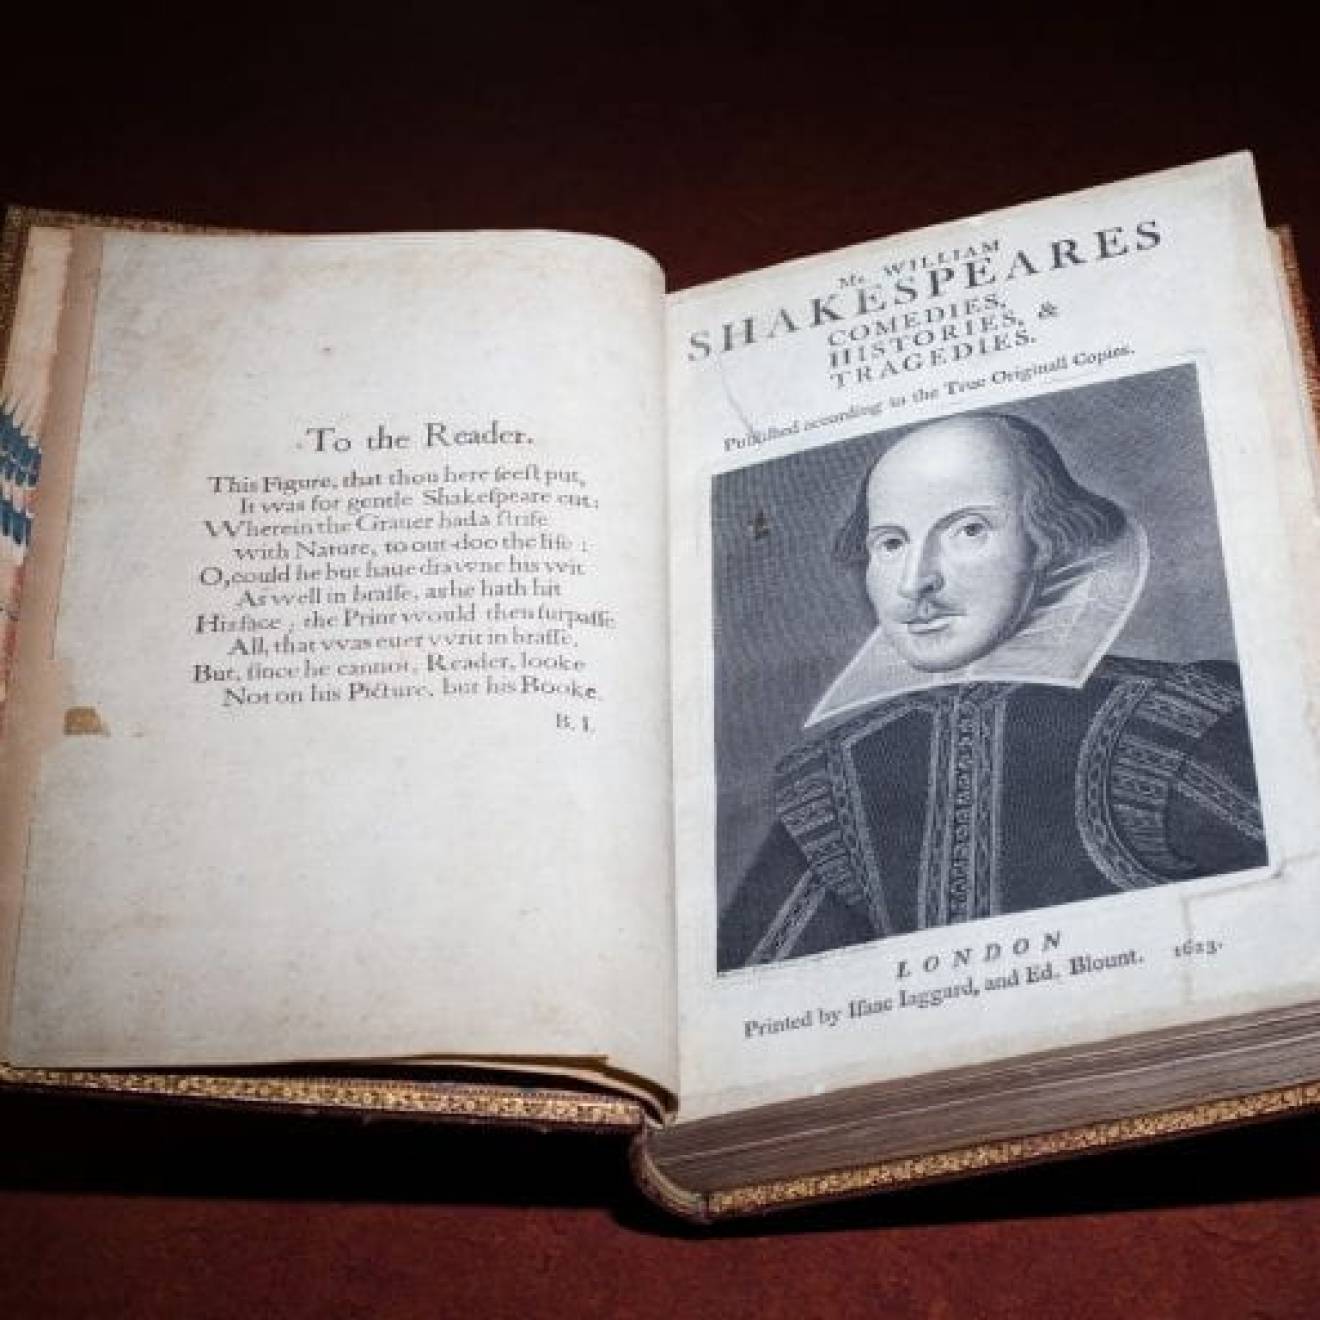 First Folio collection of Shakespeare plays with text on the left page and a portrait of Shakespeare on the right